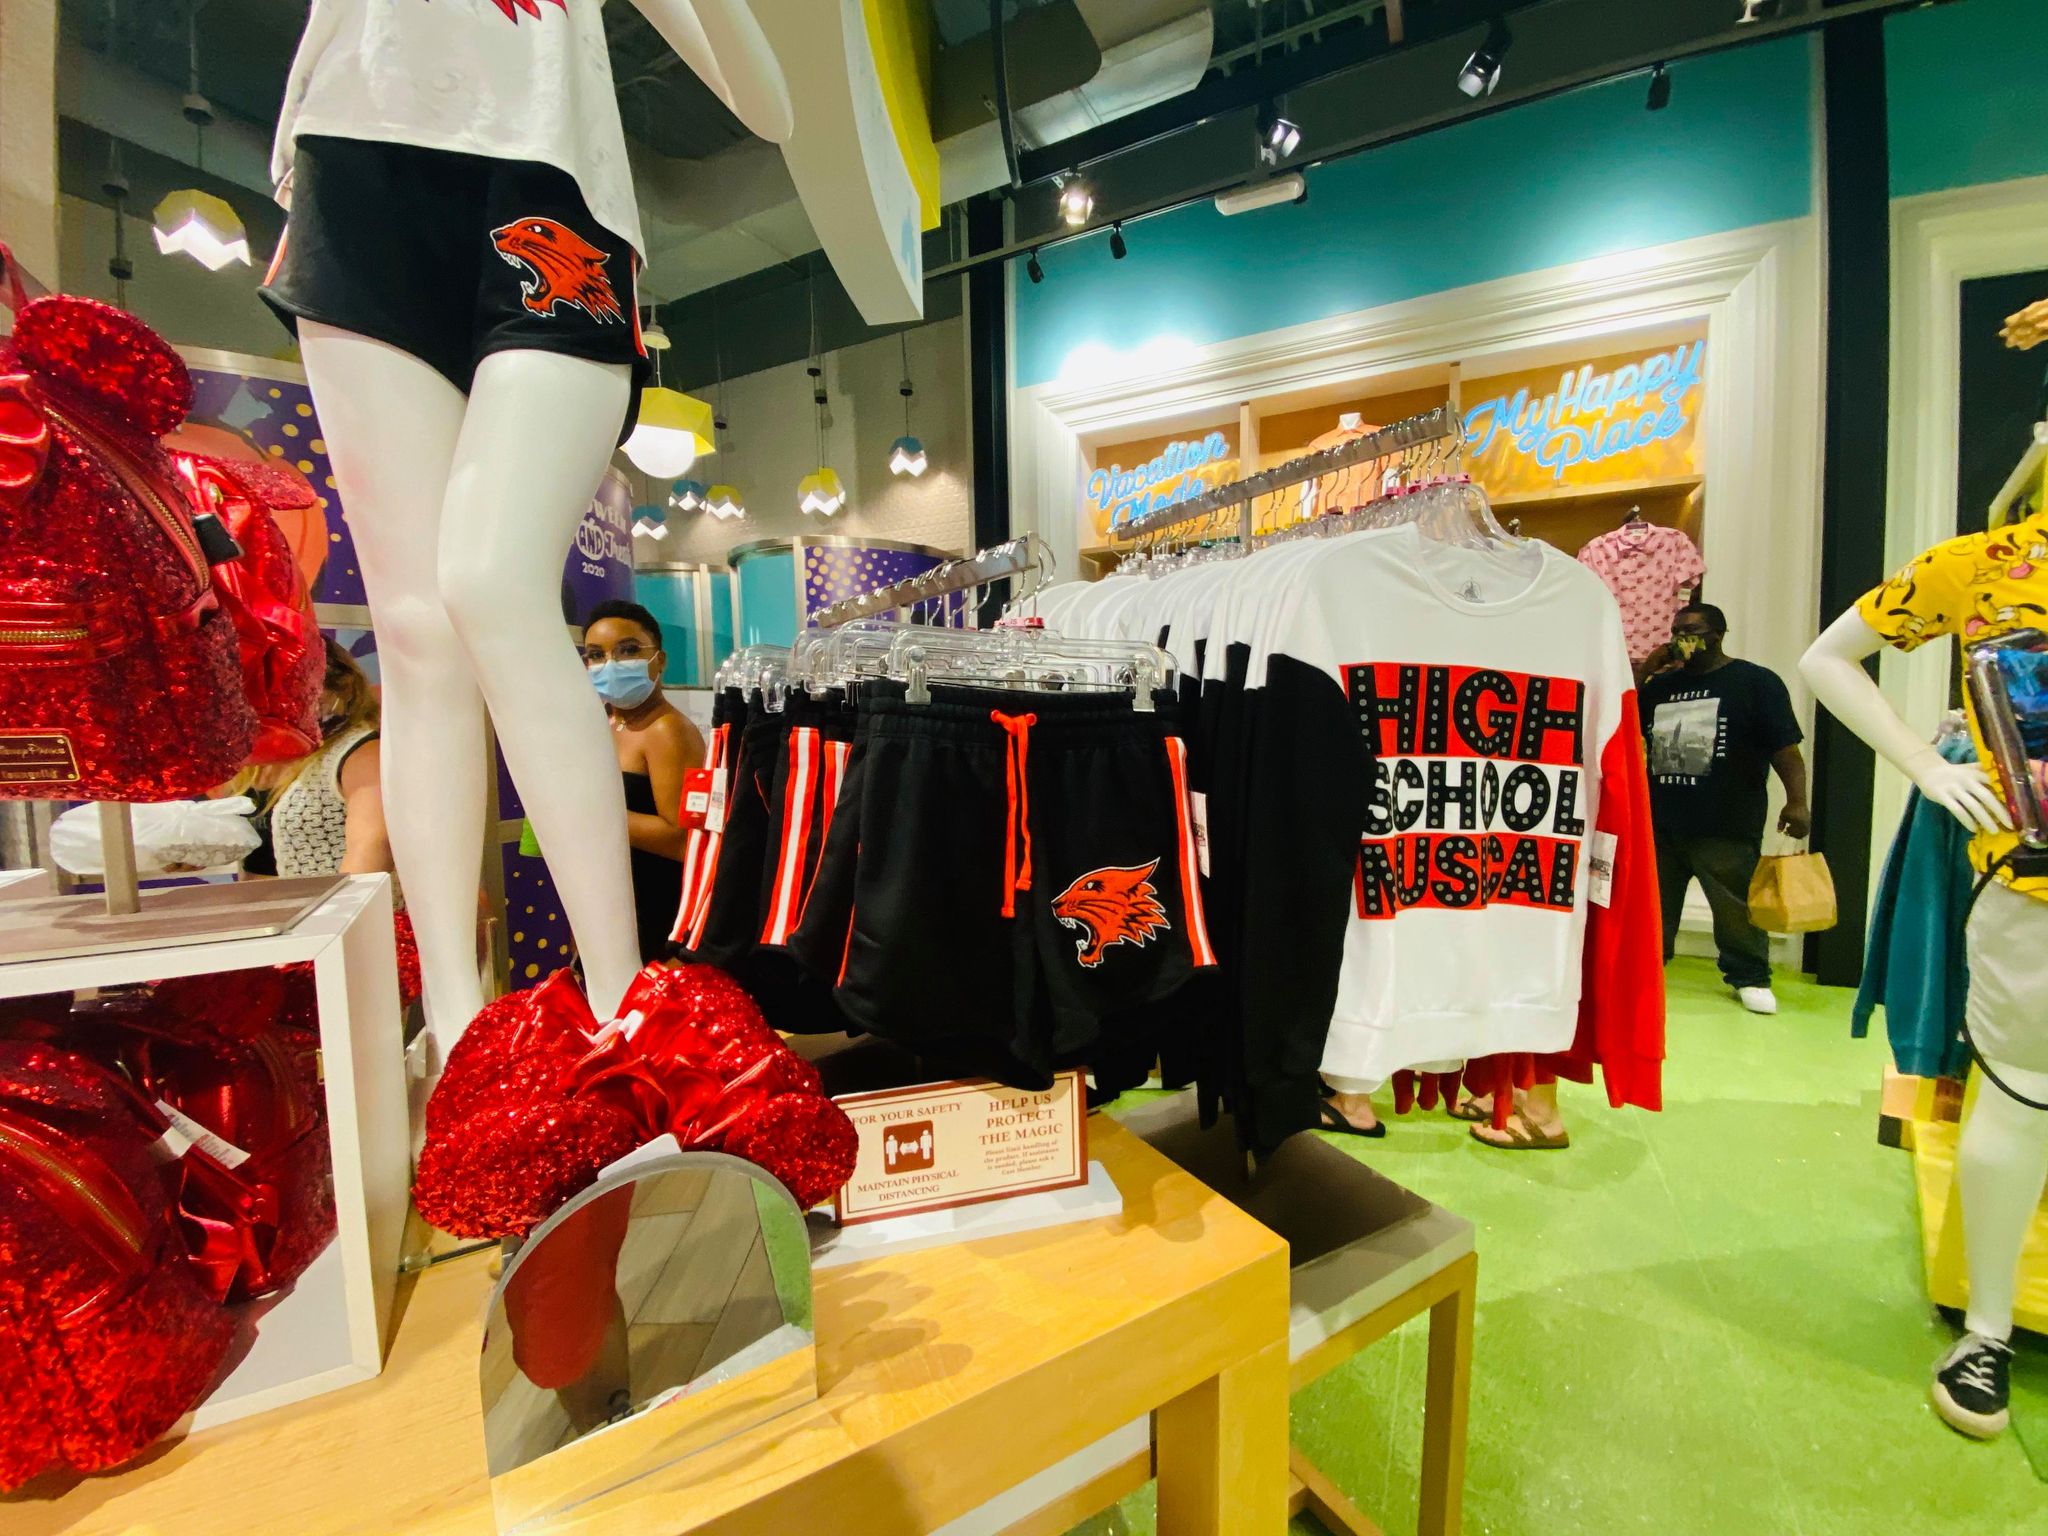 PHOTOS: New High School Musical: The Musical: The Series Merchandise  Arrives at Walt Disney World - WDW News Today